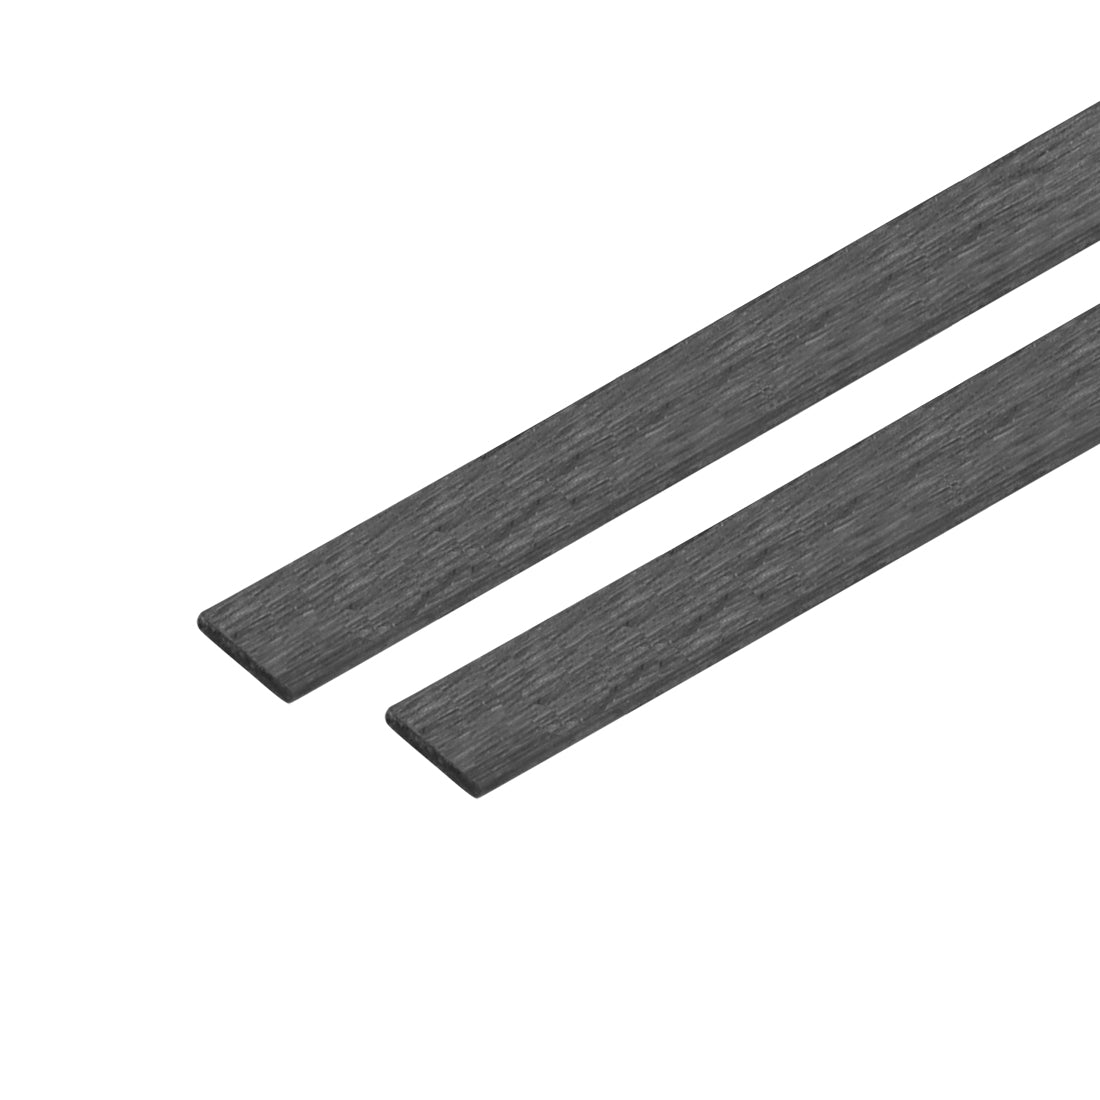 uxcell Uxcell Carbon Fiber Strip Bars 0.5x3mm 400mm Length Pultruded Carbon Fiber Strips for Kites, RC Airplane 2 Pcs